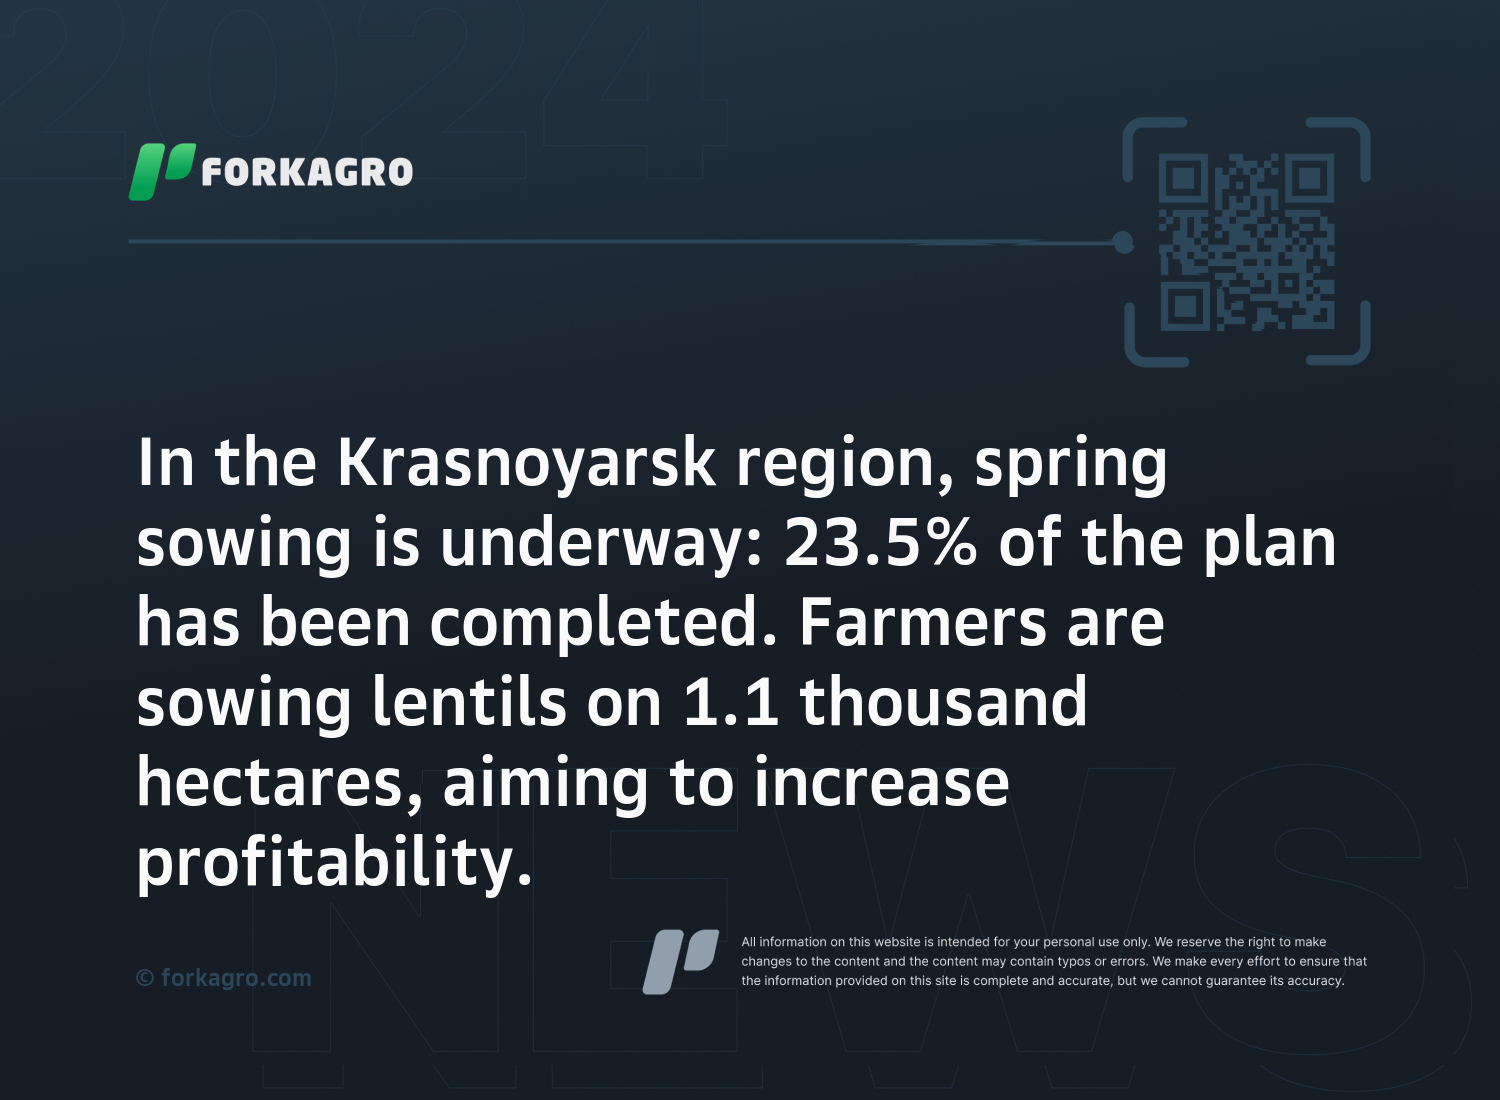 In the Krasnoyarsk region, spring sowing is underway: 23.5% of the plan has been completed. Farmers are sowing lentils on 1.1 thousand hectares, aiming to increase profitability.